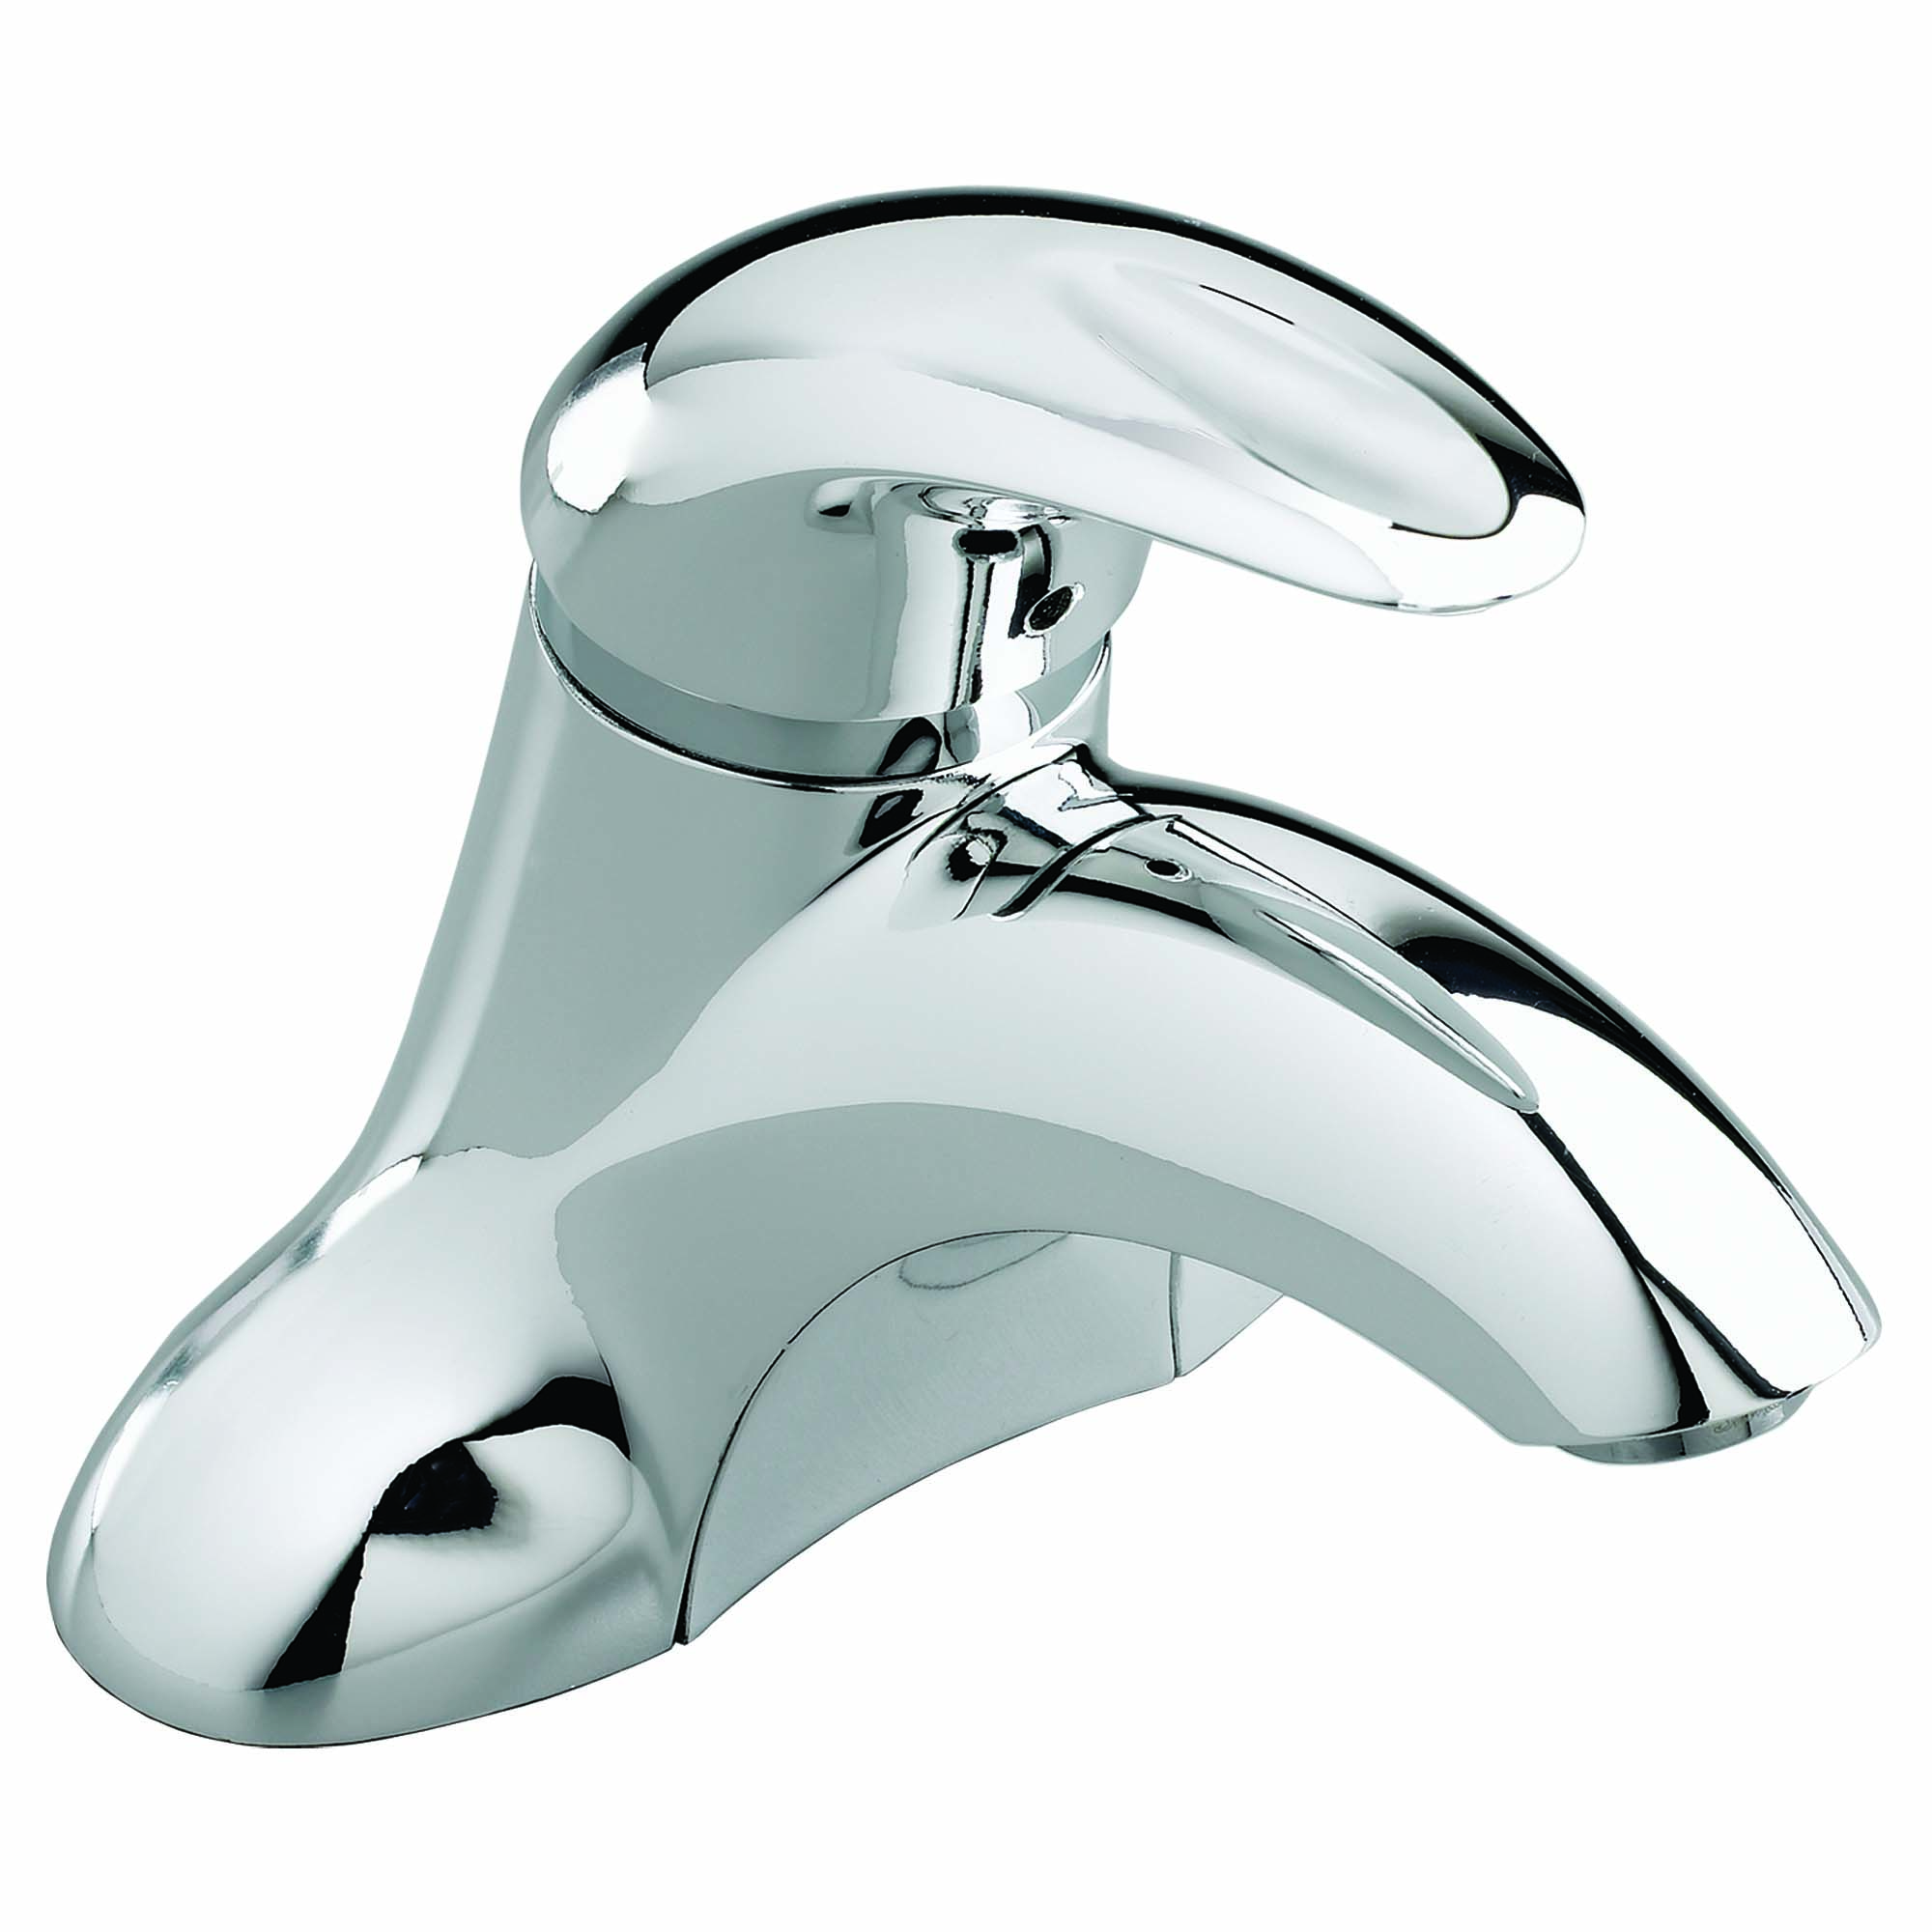 Reliant 3™ 4-Inch Centerset Single-Handle Bathroom Faucet 1.2 gpm/4.5 L/min With Lever Handle